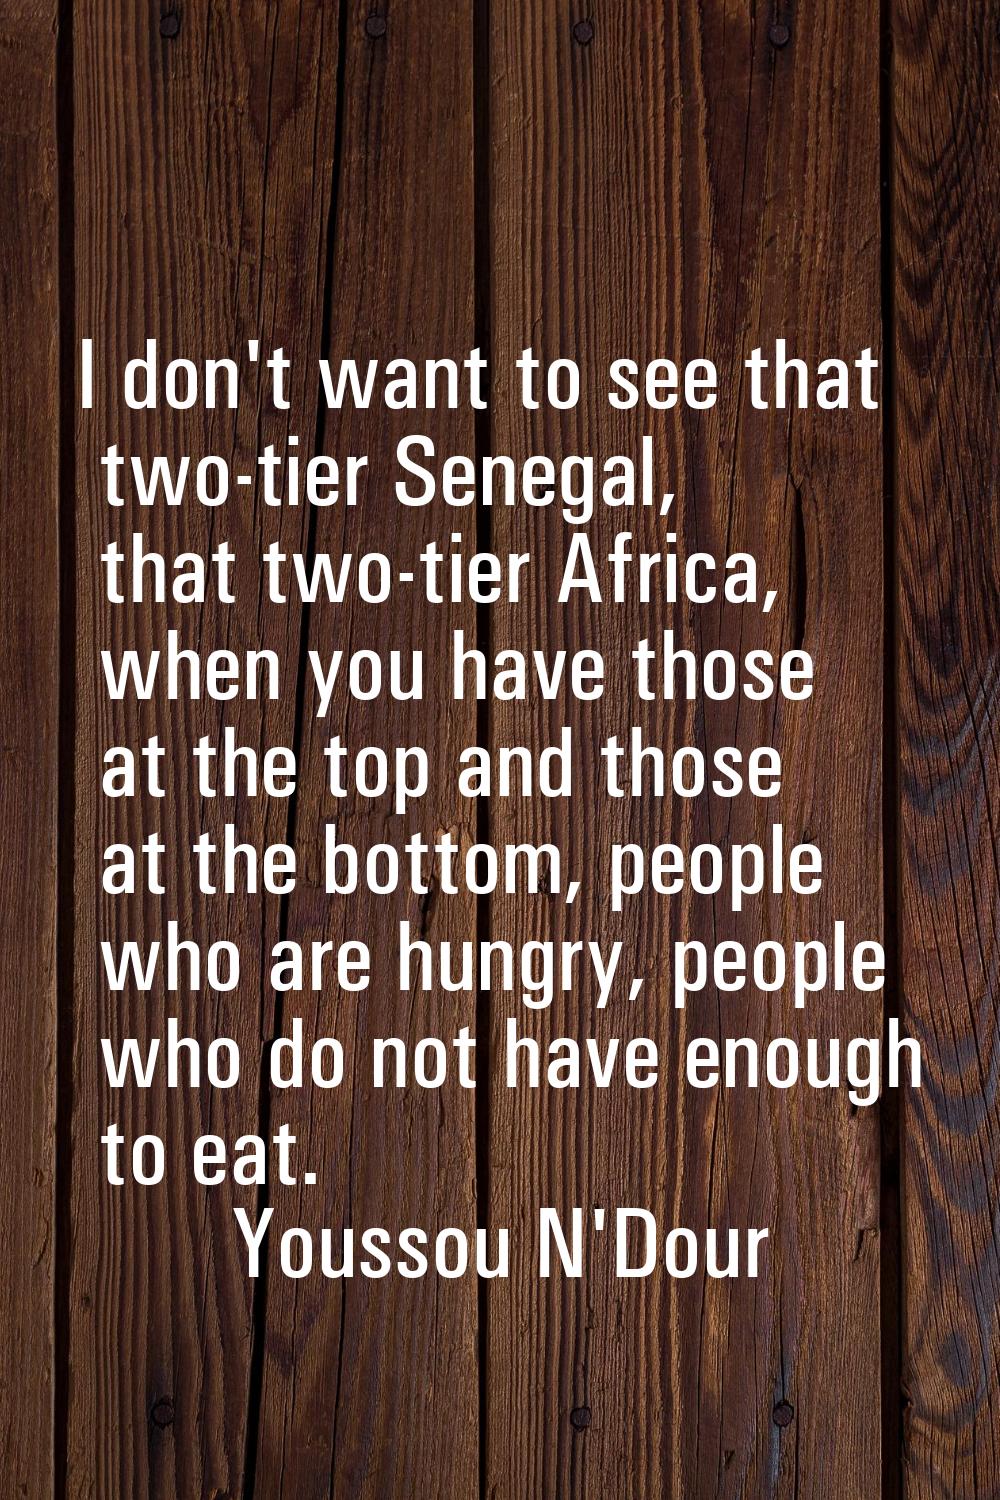 I don't want to see that two-tier Senegal, that two-tier Africa, when you have those at the top and